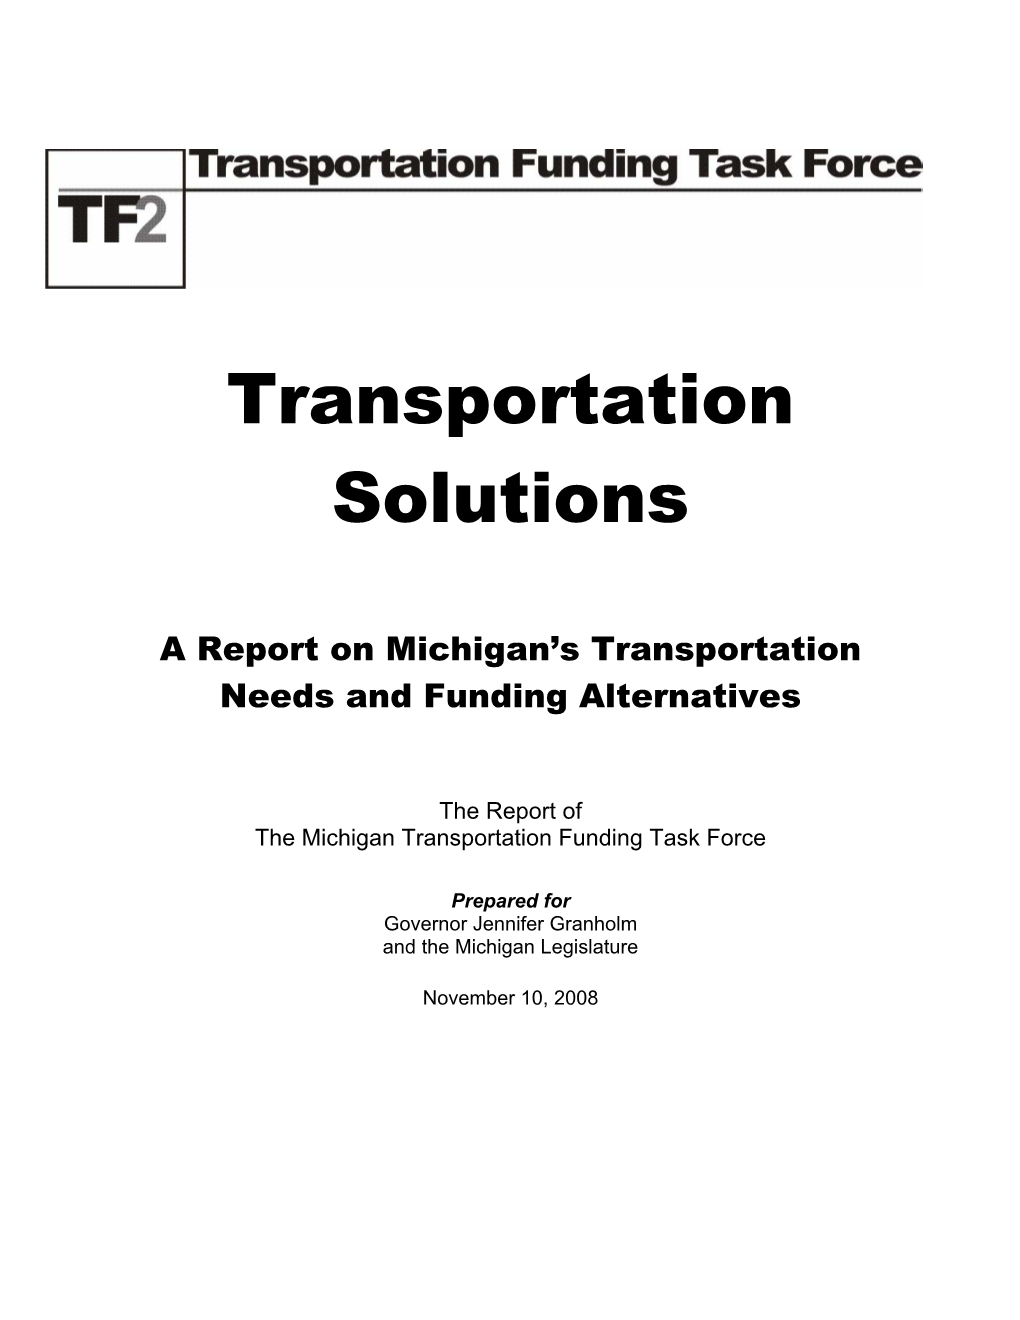 Report of the Transportation Funding Task Force